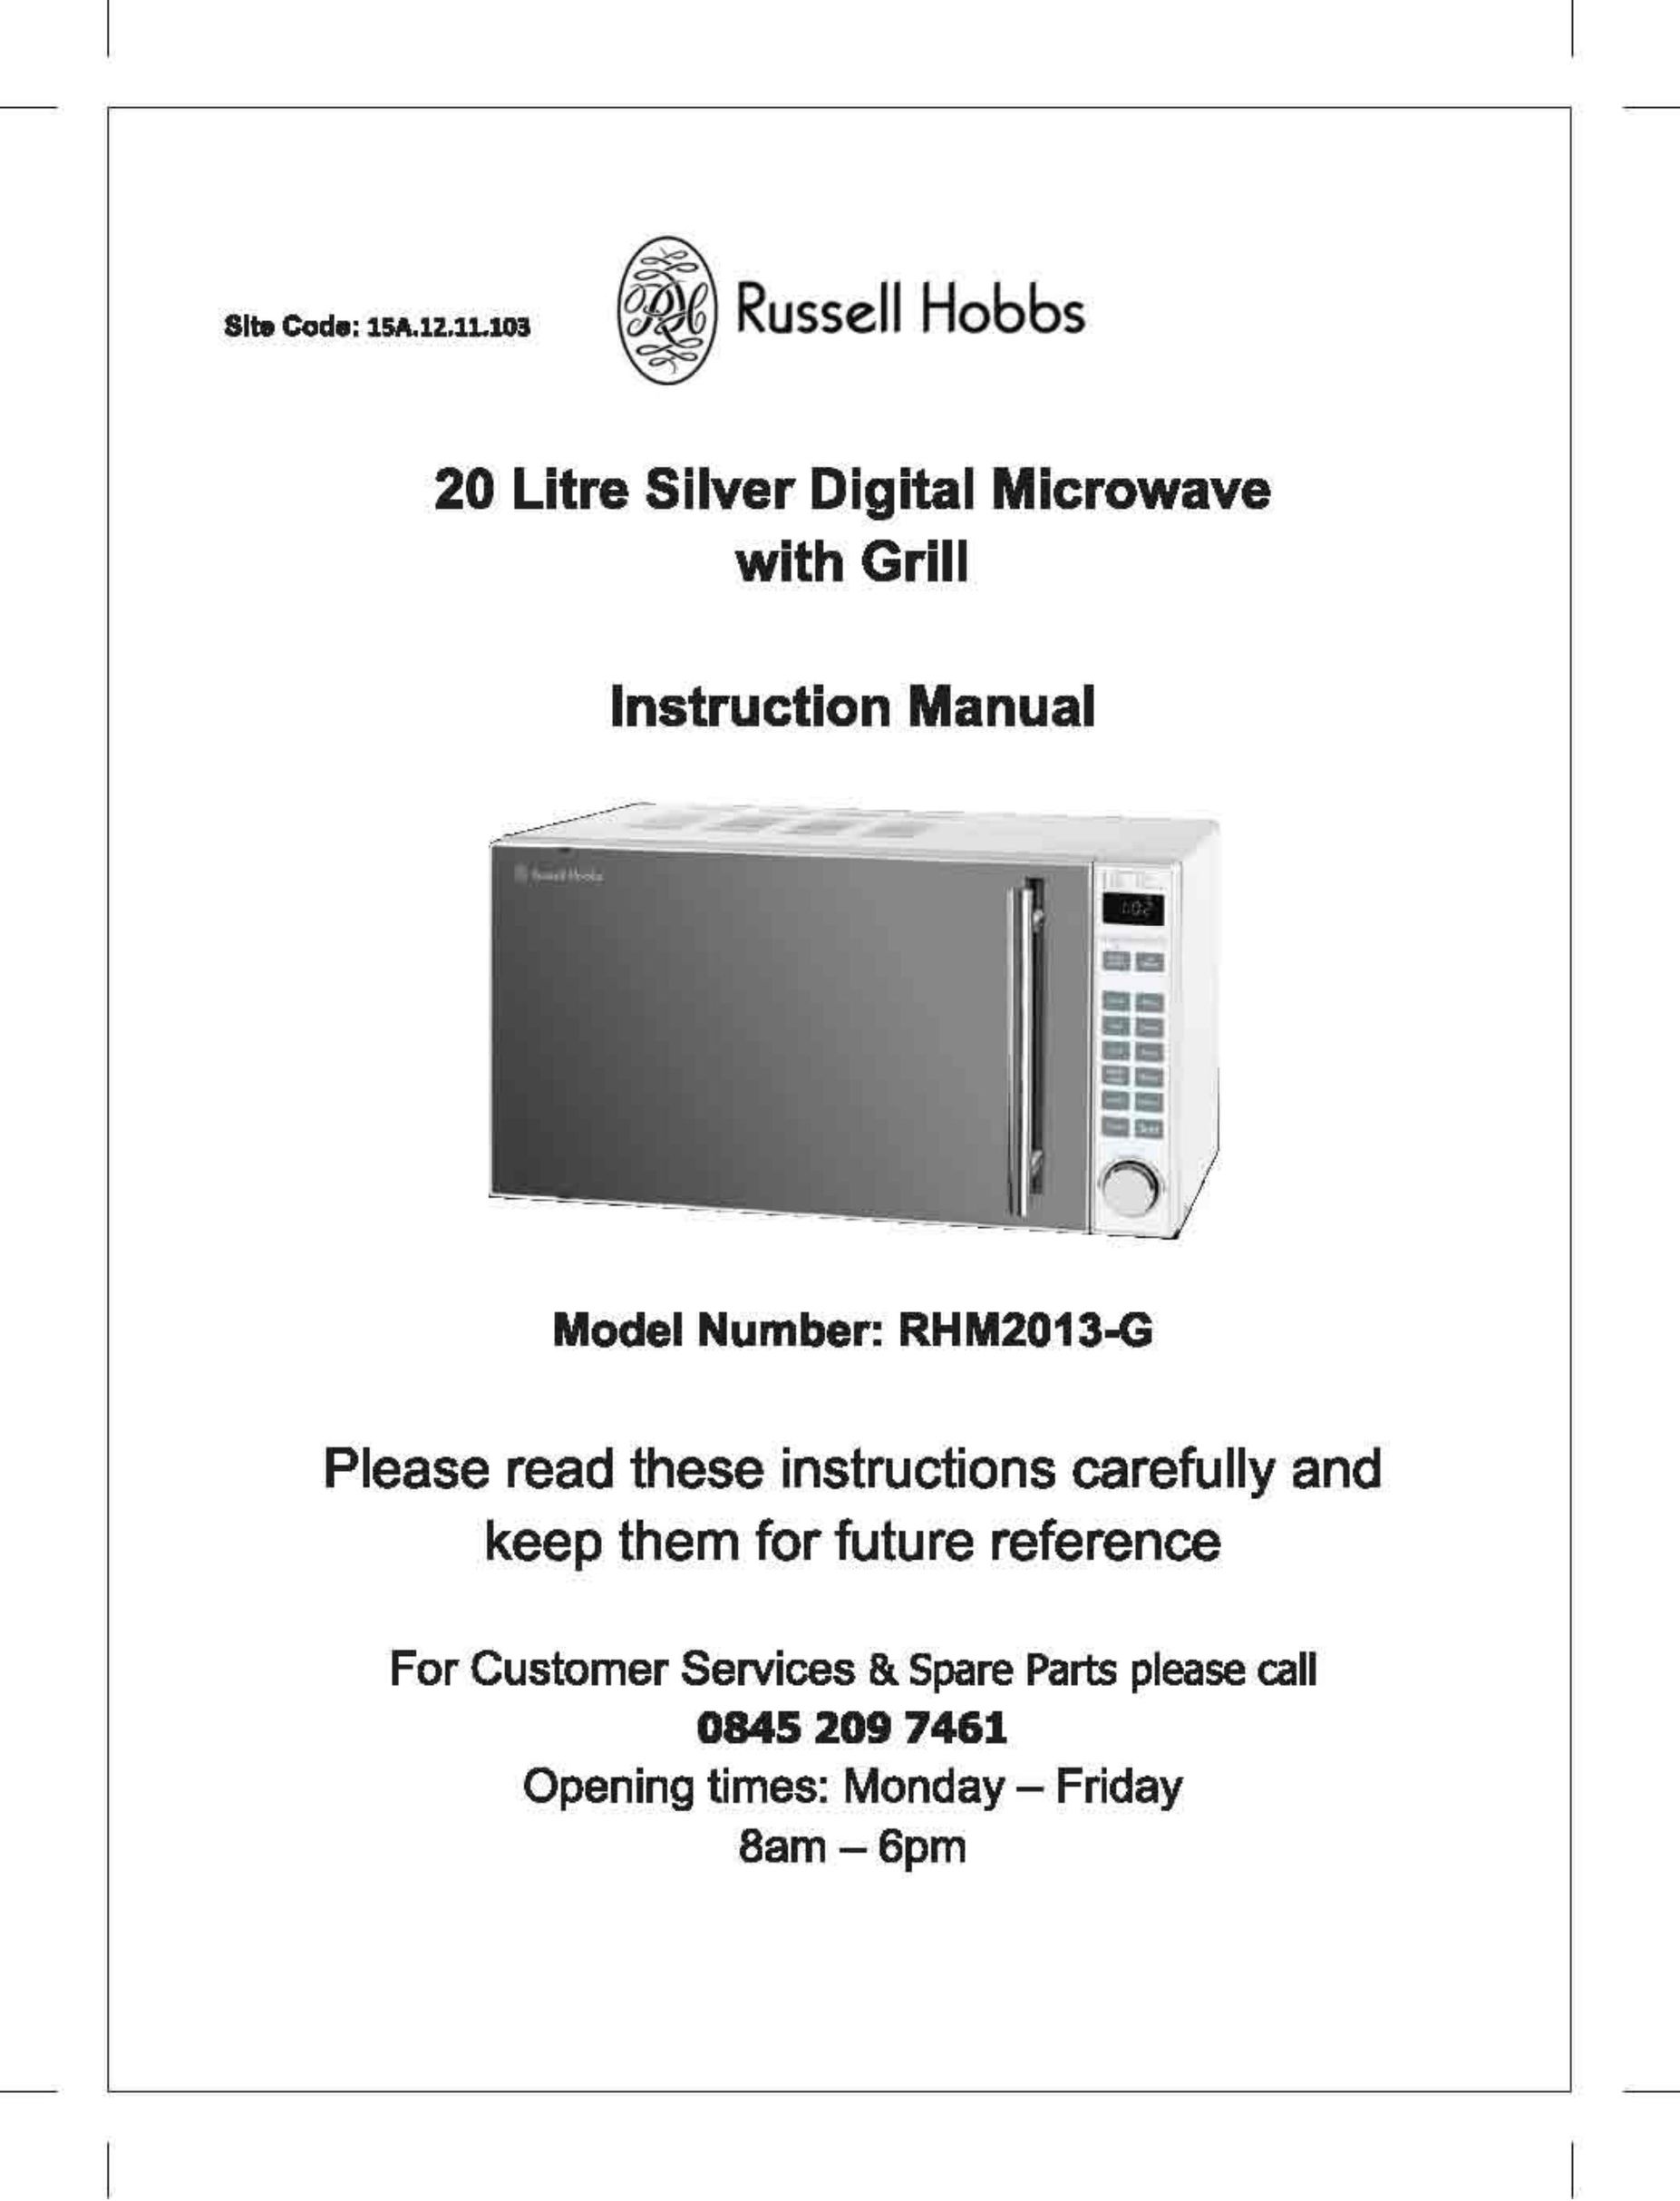 Russell Hobbs RHM2013-G Microwave Oven User Manual